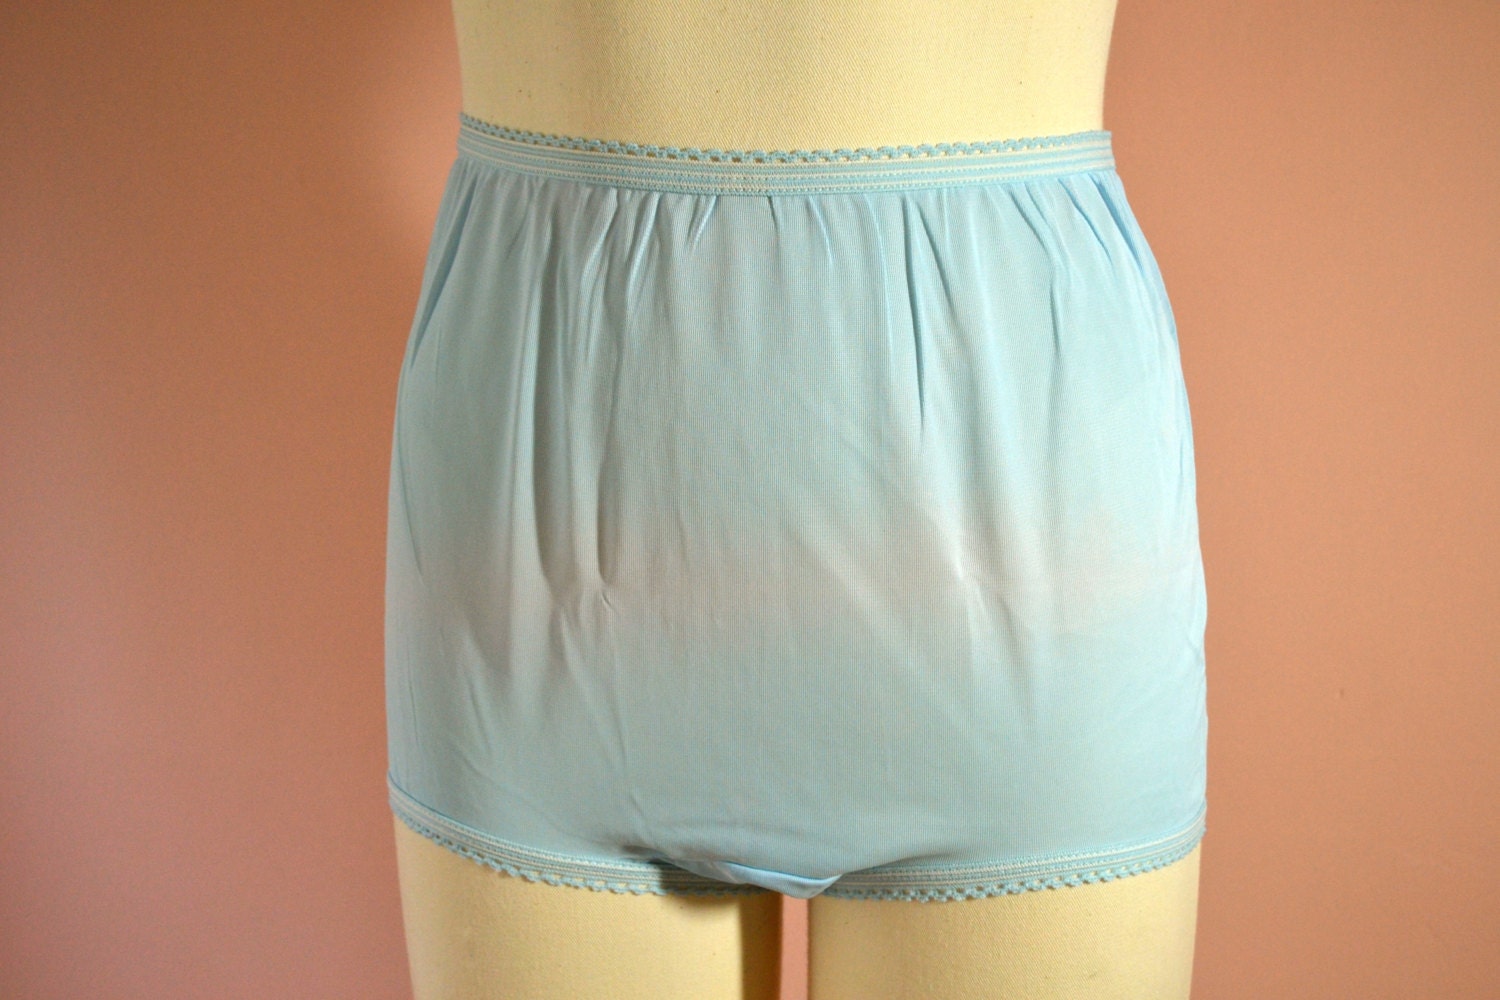 Sale Blue All Nylon Or Acetate Granny Panties Knickers